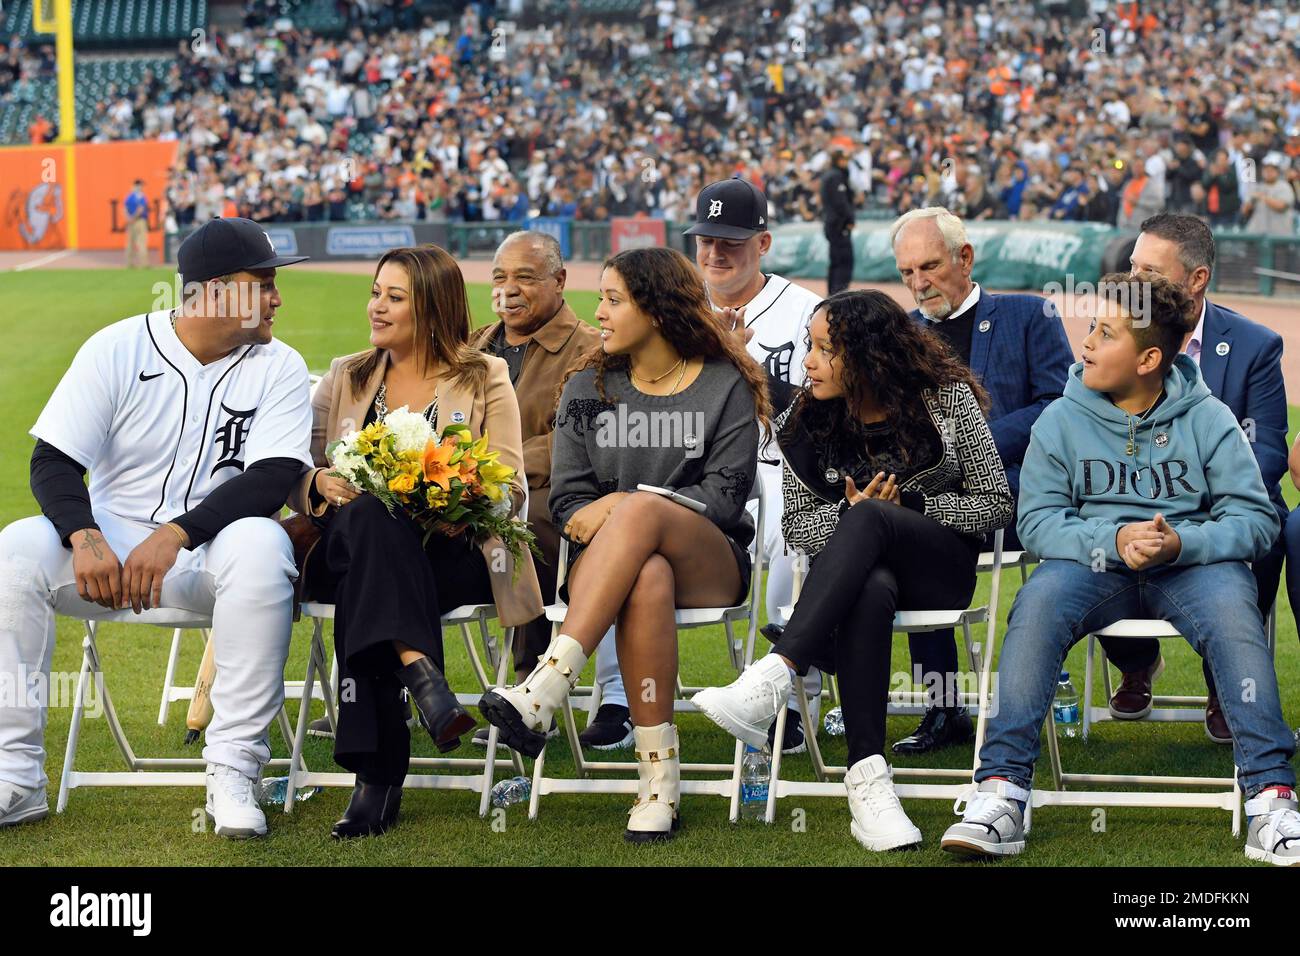 Detroit Tigers' Miguel Cabrera, far left, sits with his wife, Rosangel  Cabrera, second from left, and their three children, Rosangel Cabrera,  center, Isabella Cabrera, second from right, and Christopher Cabrera during  a